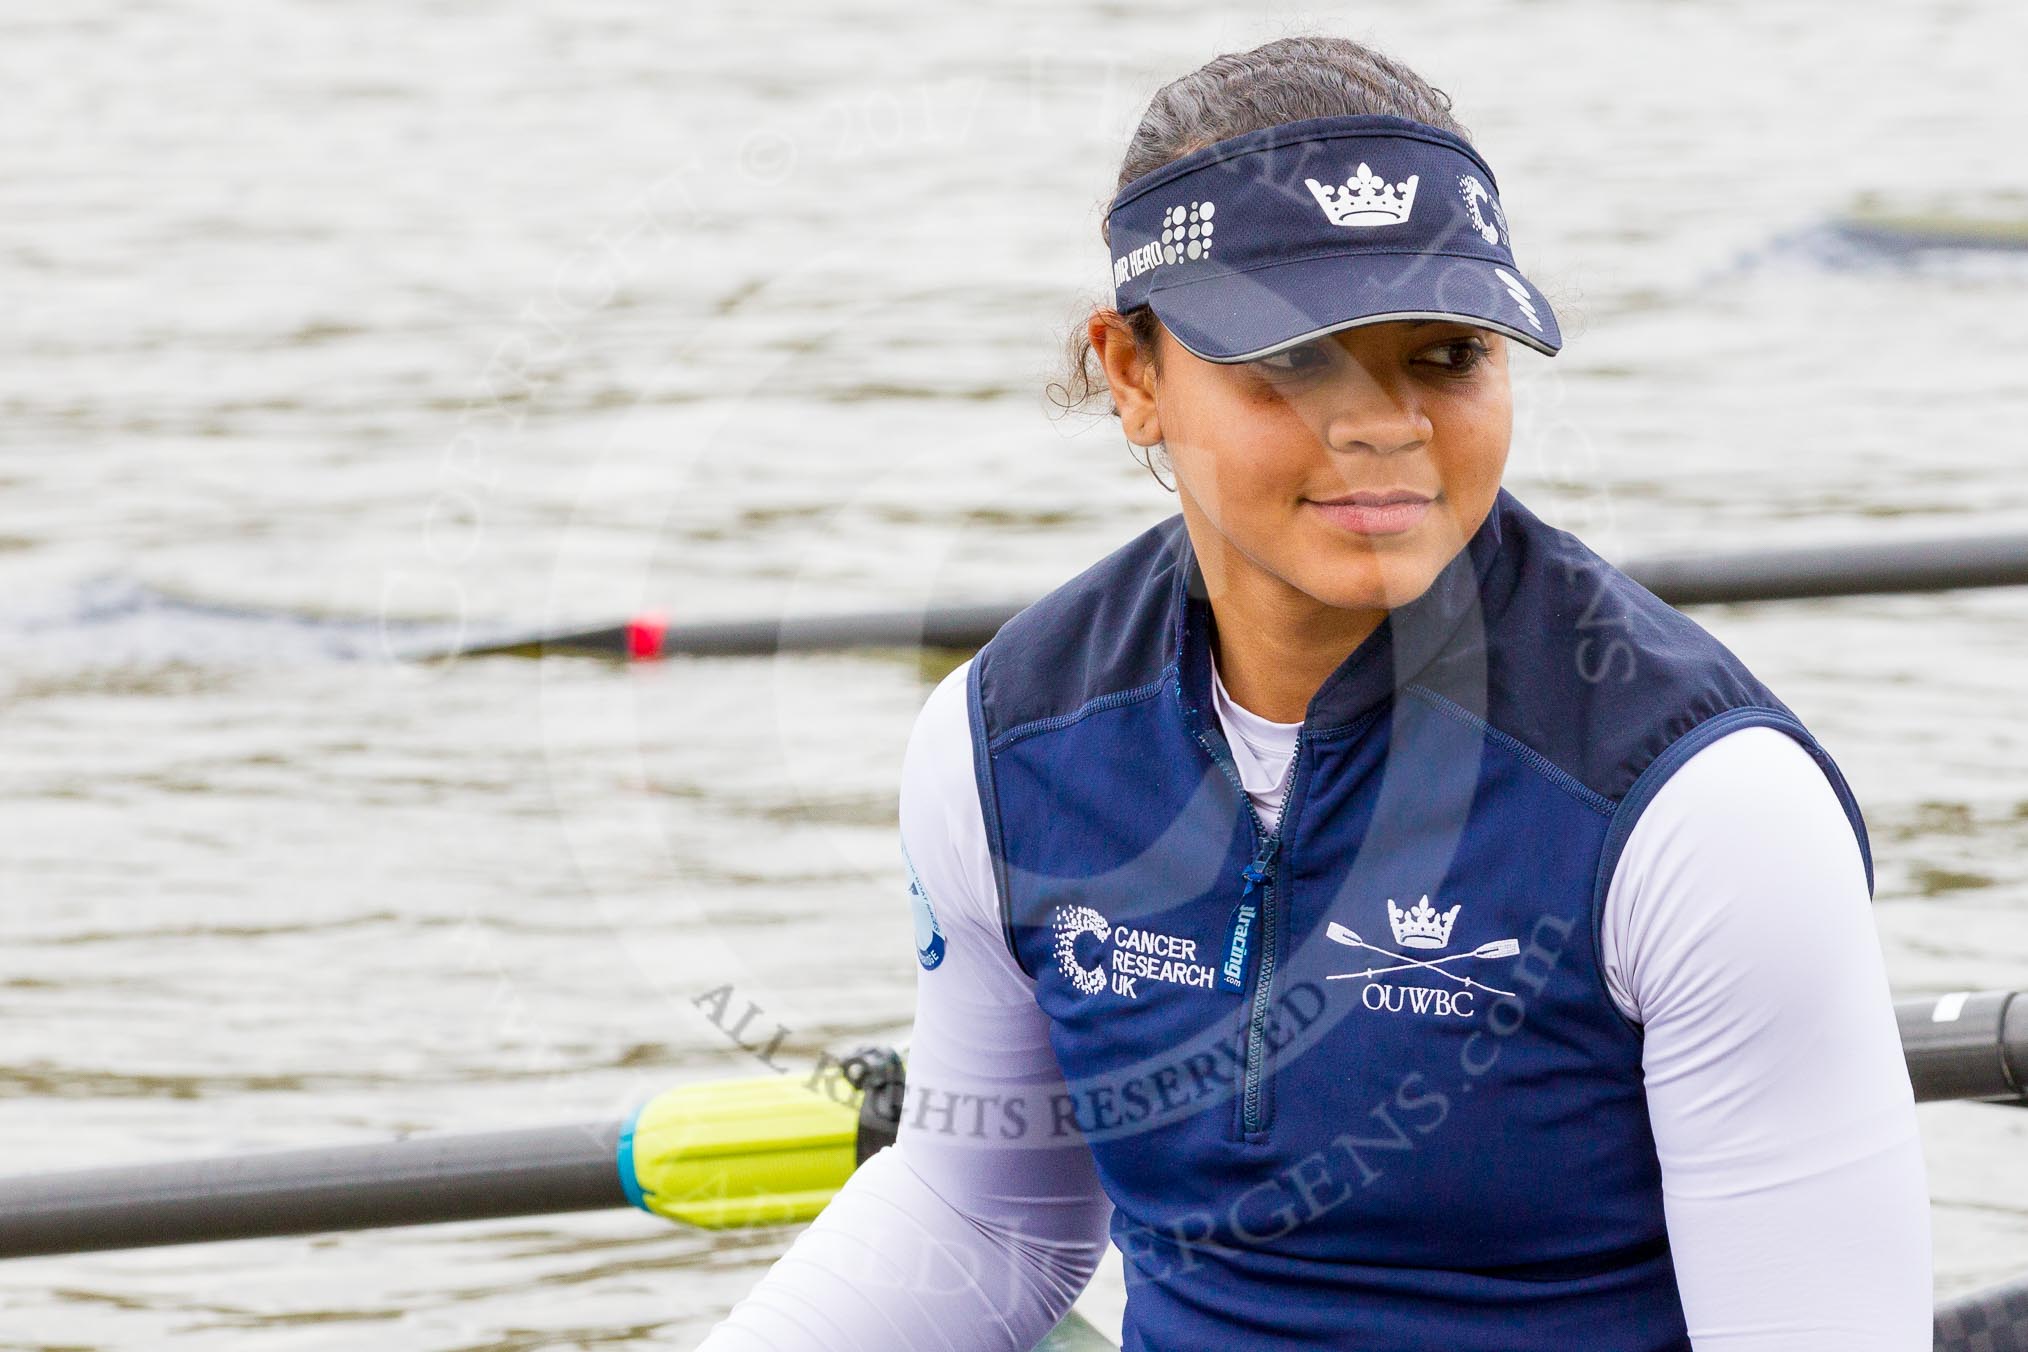 The Cancer Research UK Boat Race season 2017 - Women's Boat Race Fixture OUWBC vs Molesey BC: OUWBC's 7 seat Jenna Hebert.
River Thames between Putney Bridge and Mortlake,
London SW15,

United Kingdom,
on 19 March 2017 at 15:20, image #12